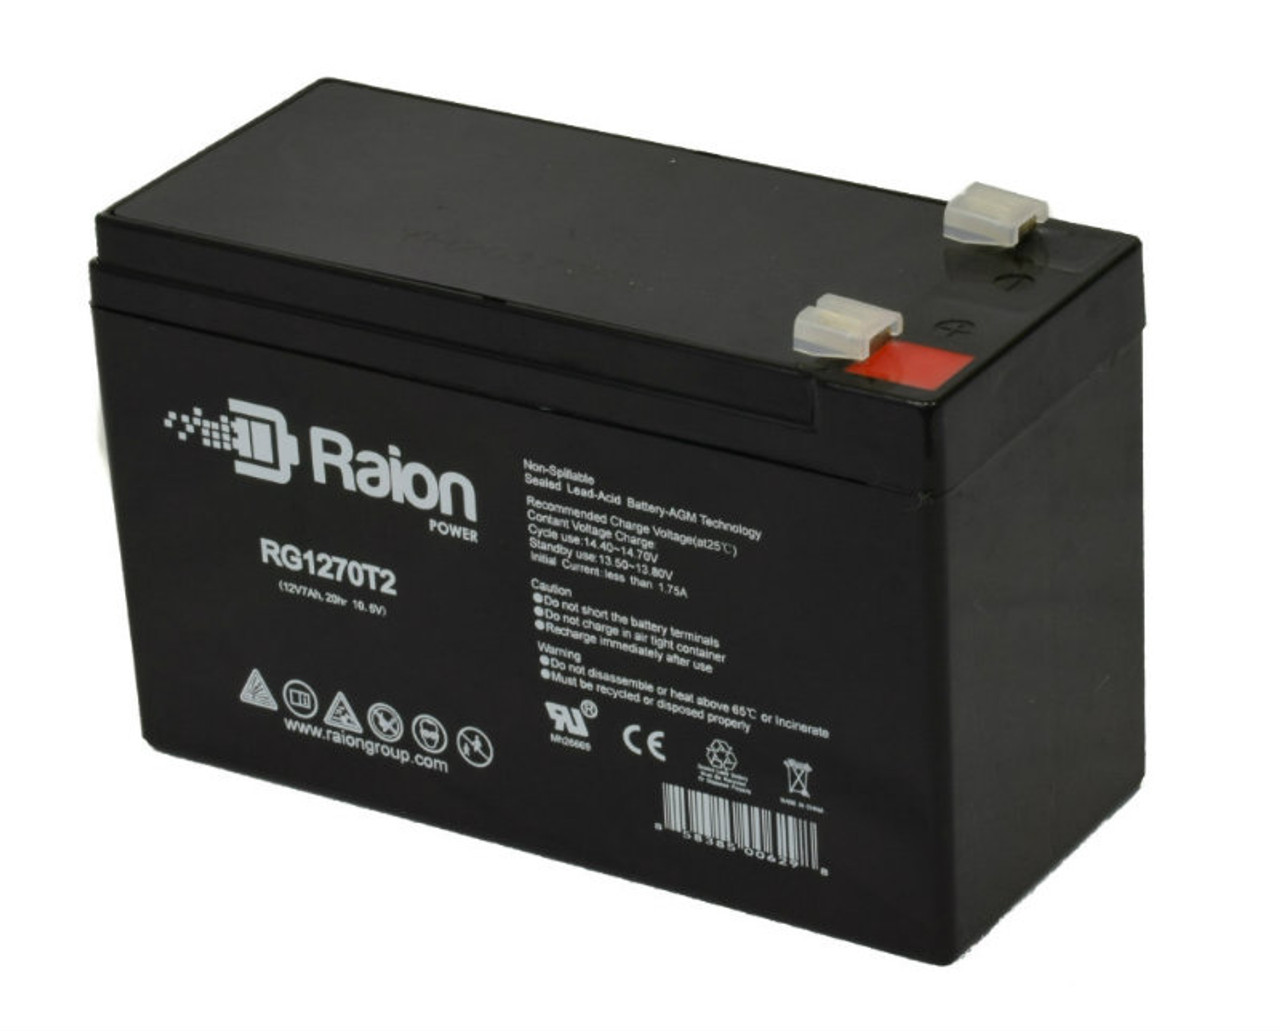 Raion Power Replacement 12V 7Ah Battery for Razor 151300650 Pocket Mod Daisy - 1 Pack